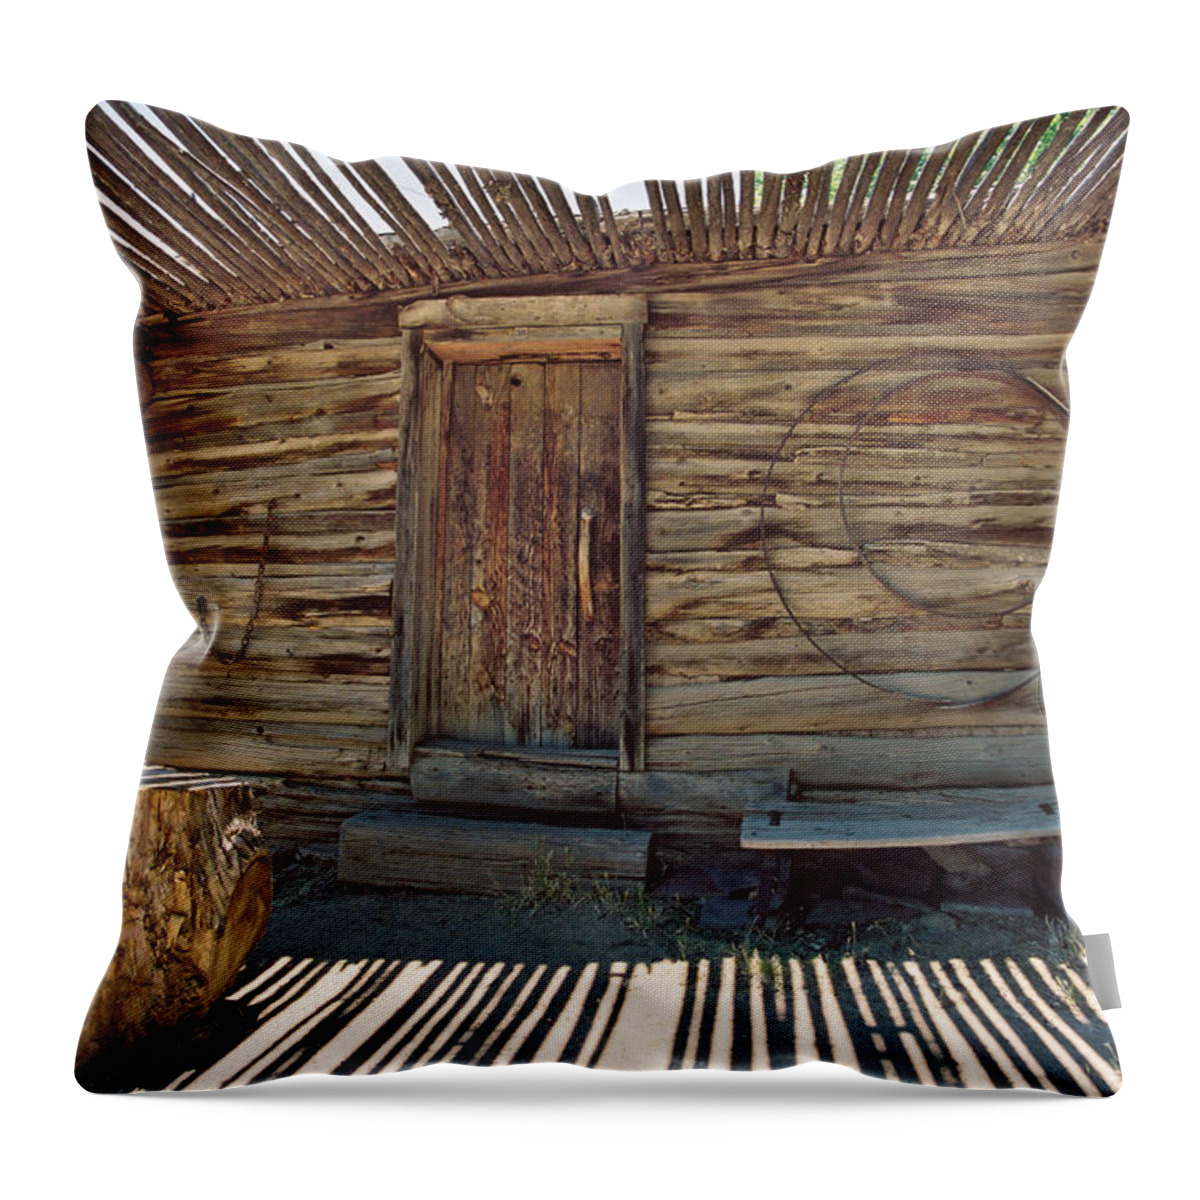 Santa Fe Throw Pillow featuring the photograph Carreteria At Las Golondrinas by Ron Weathers